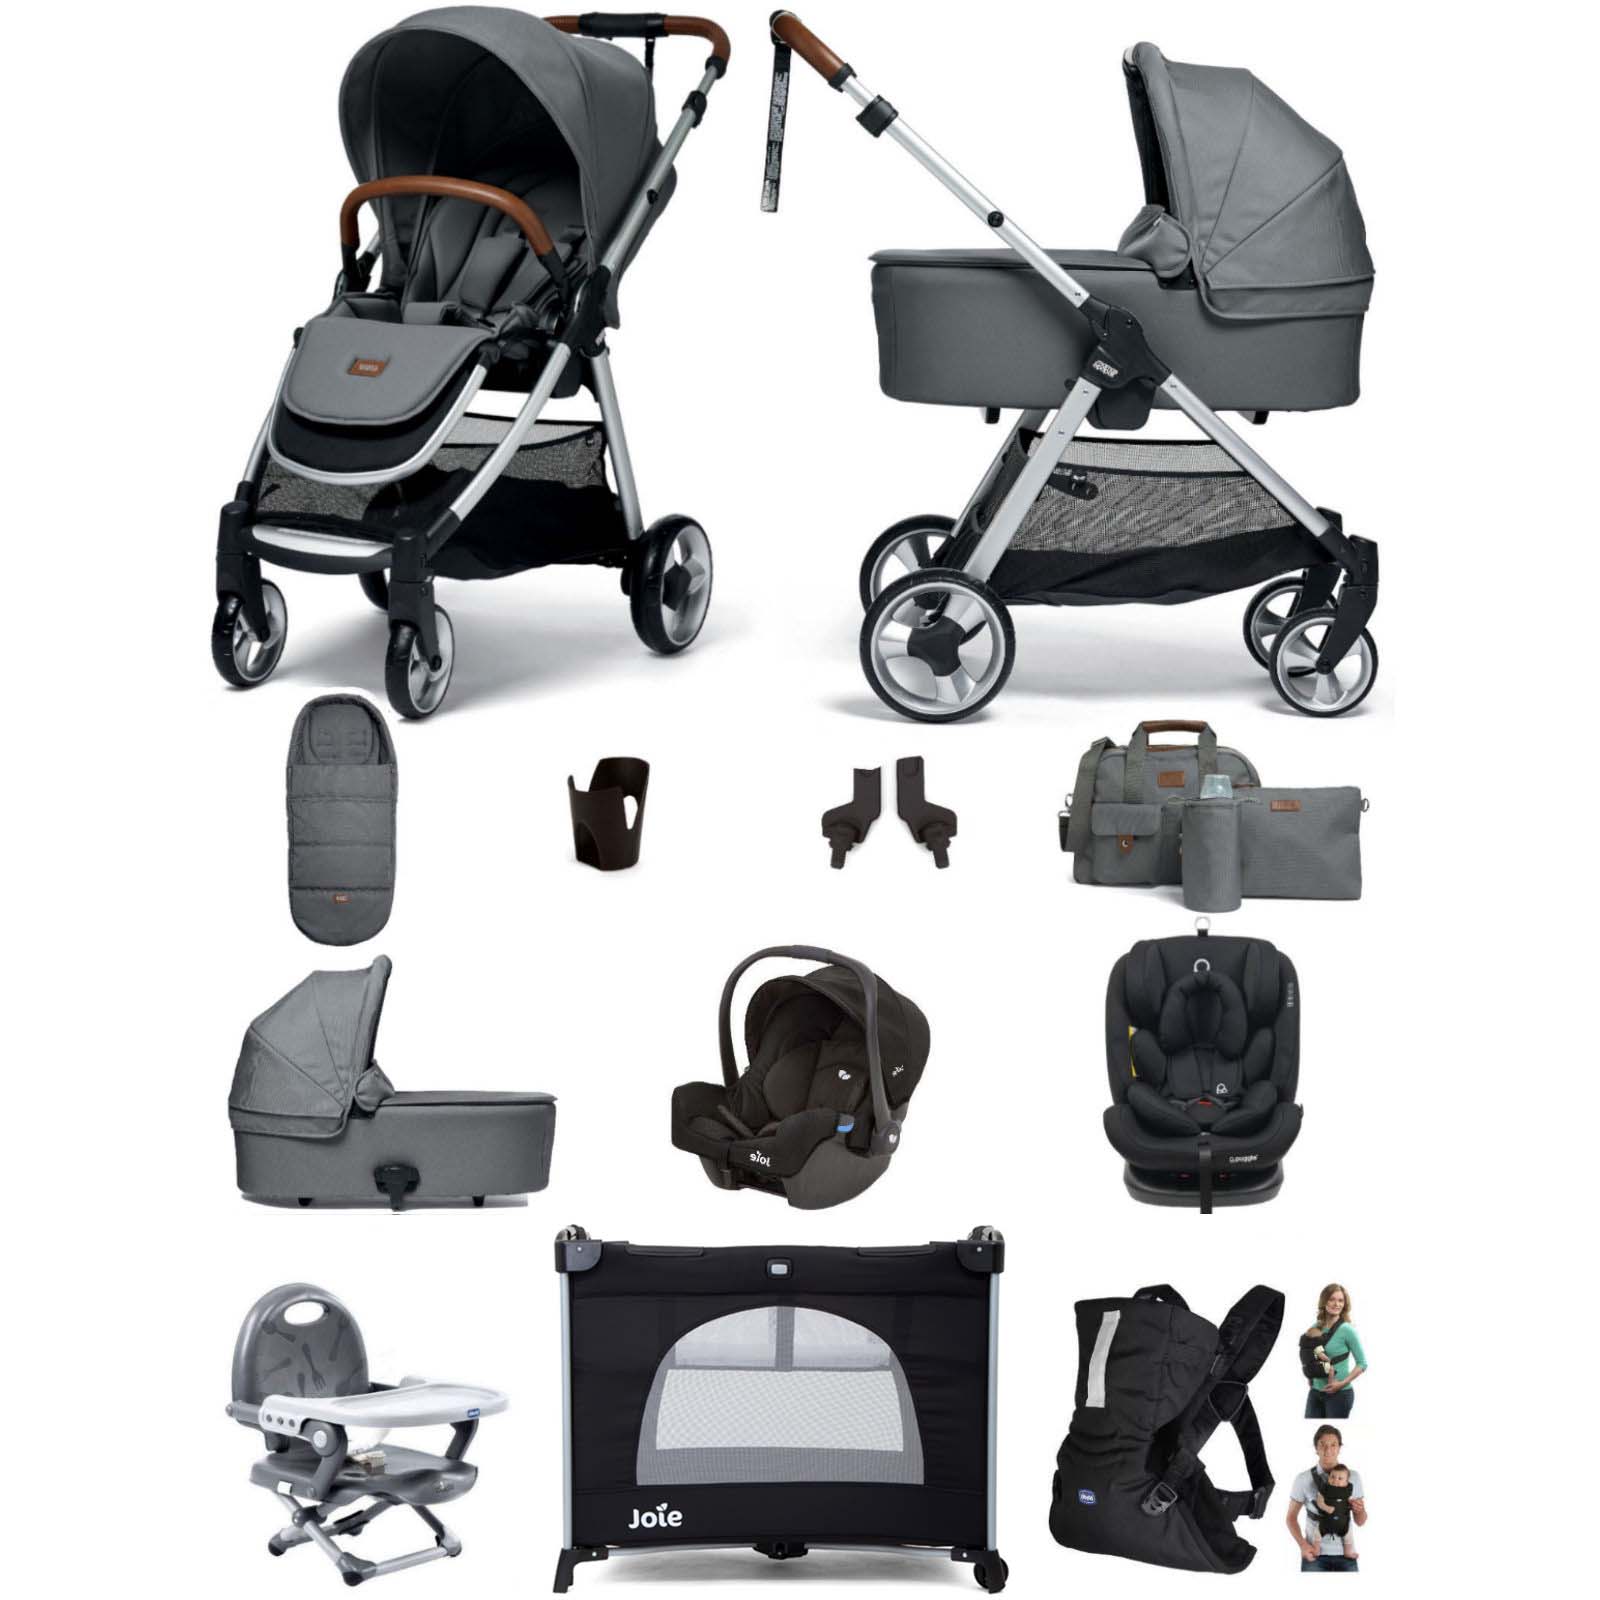 Mamas & Papas Flip XT2 12pc Essentials (Gemm 0+ & Lockton 0+123 Car Seat) Everything You Need Travel System Bundle with Carrycot - Fossil Grey